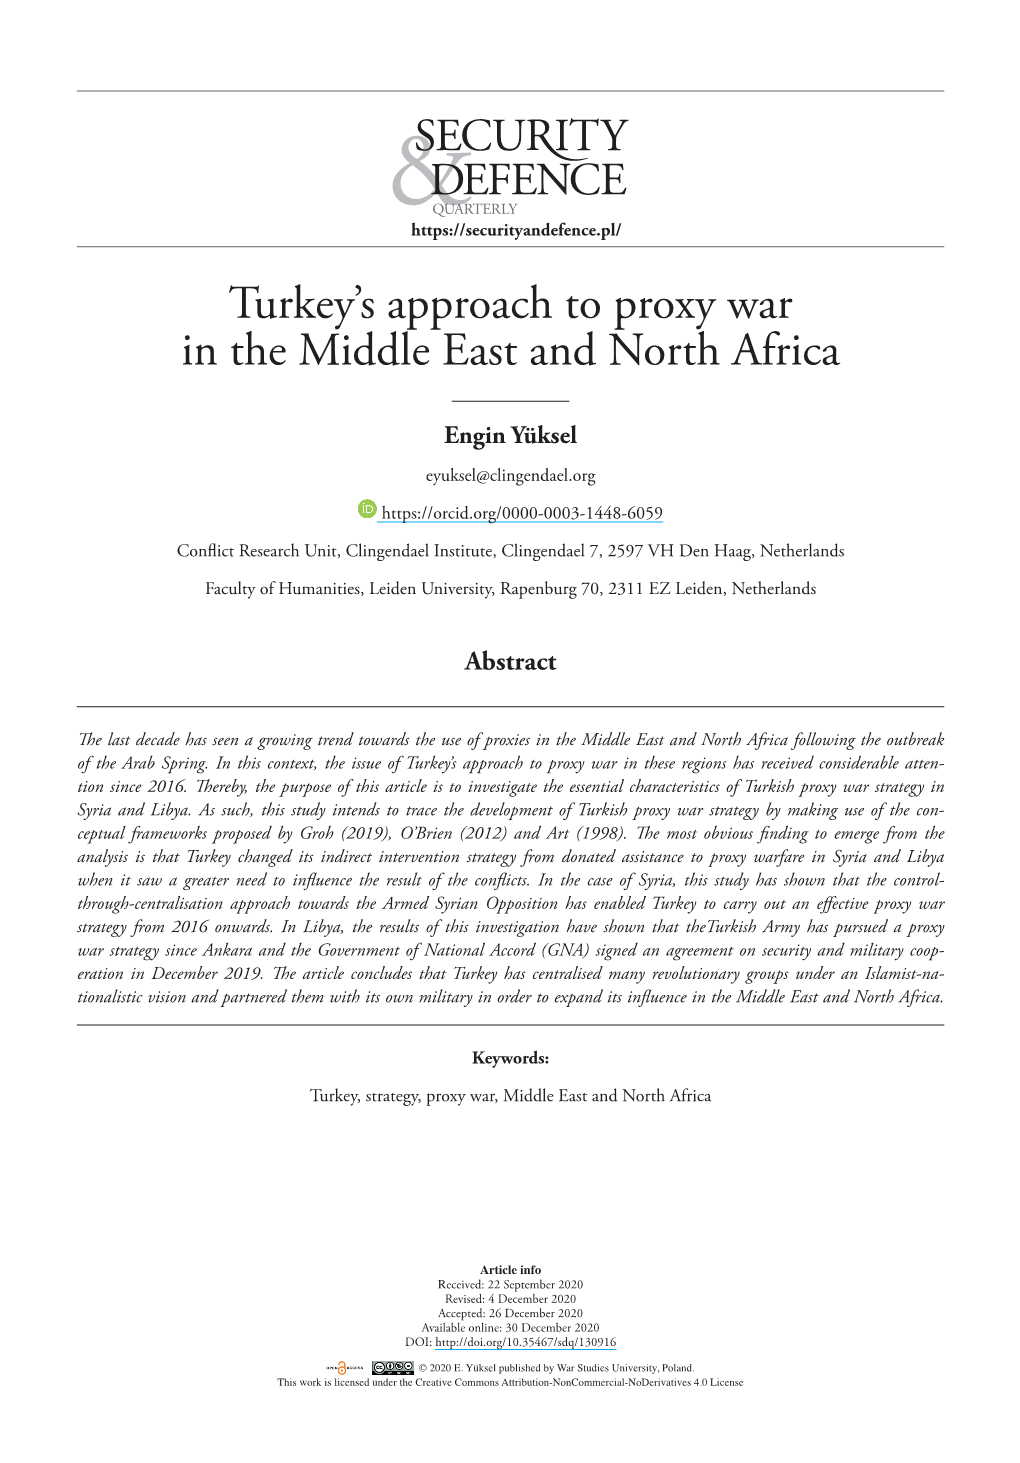 Turkey's Approach to Proxy War in the Middle East and North Africa